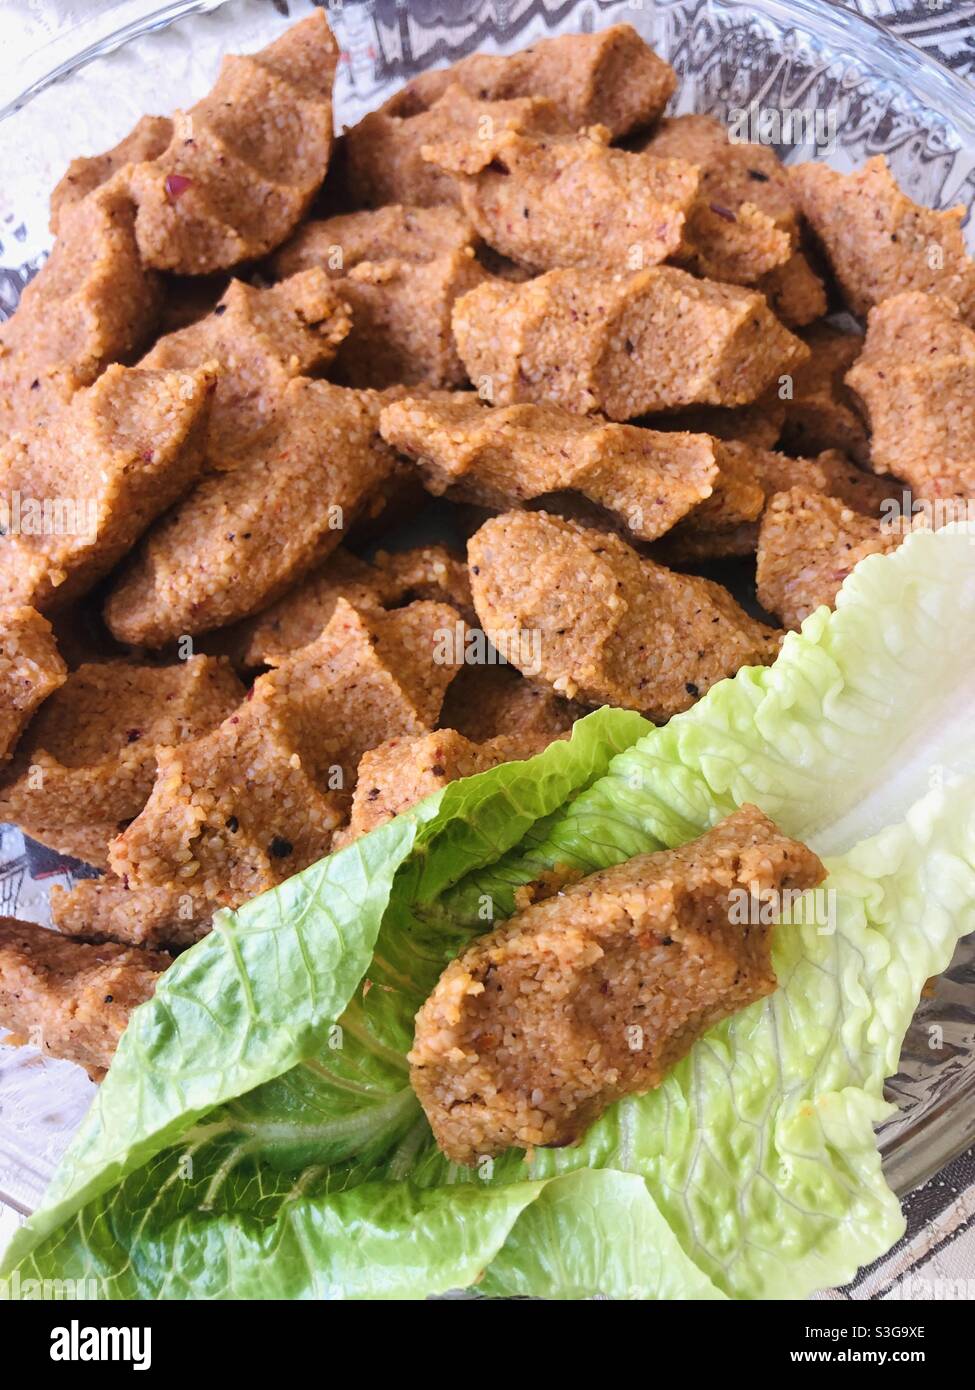 Turkish vegan dish cig kofte of which main ingredient is bulgur wheat. It’s served with lettuce and other vegetables Stock Photo